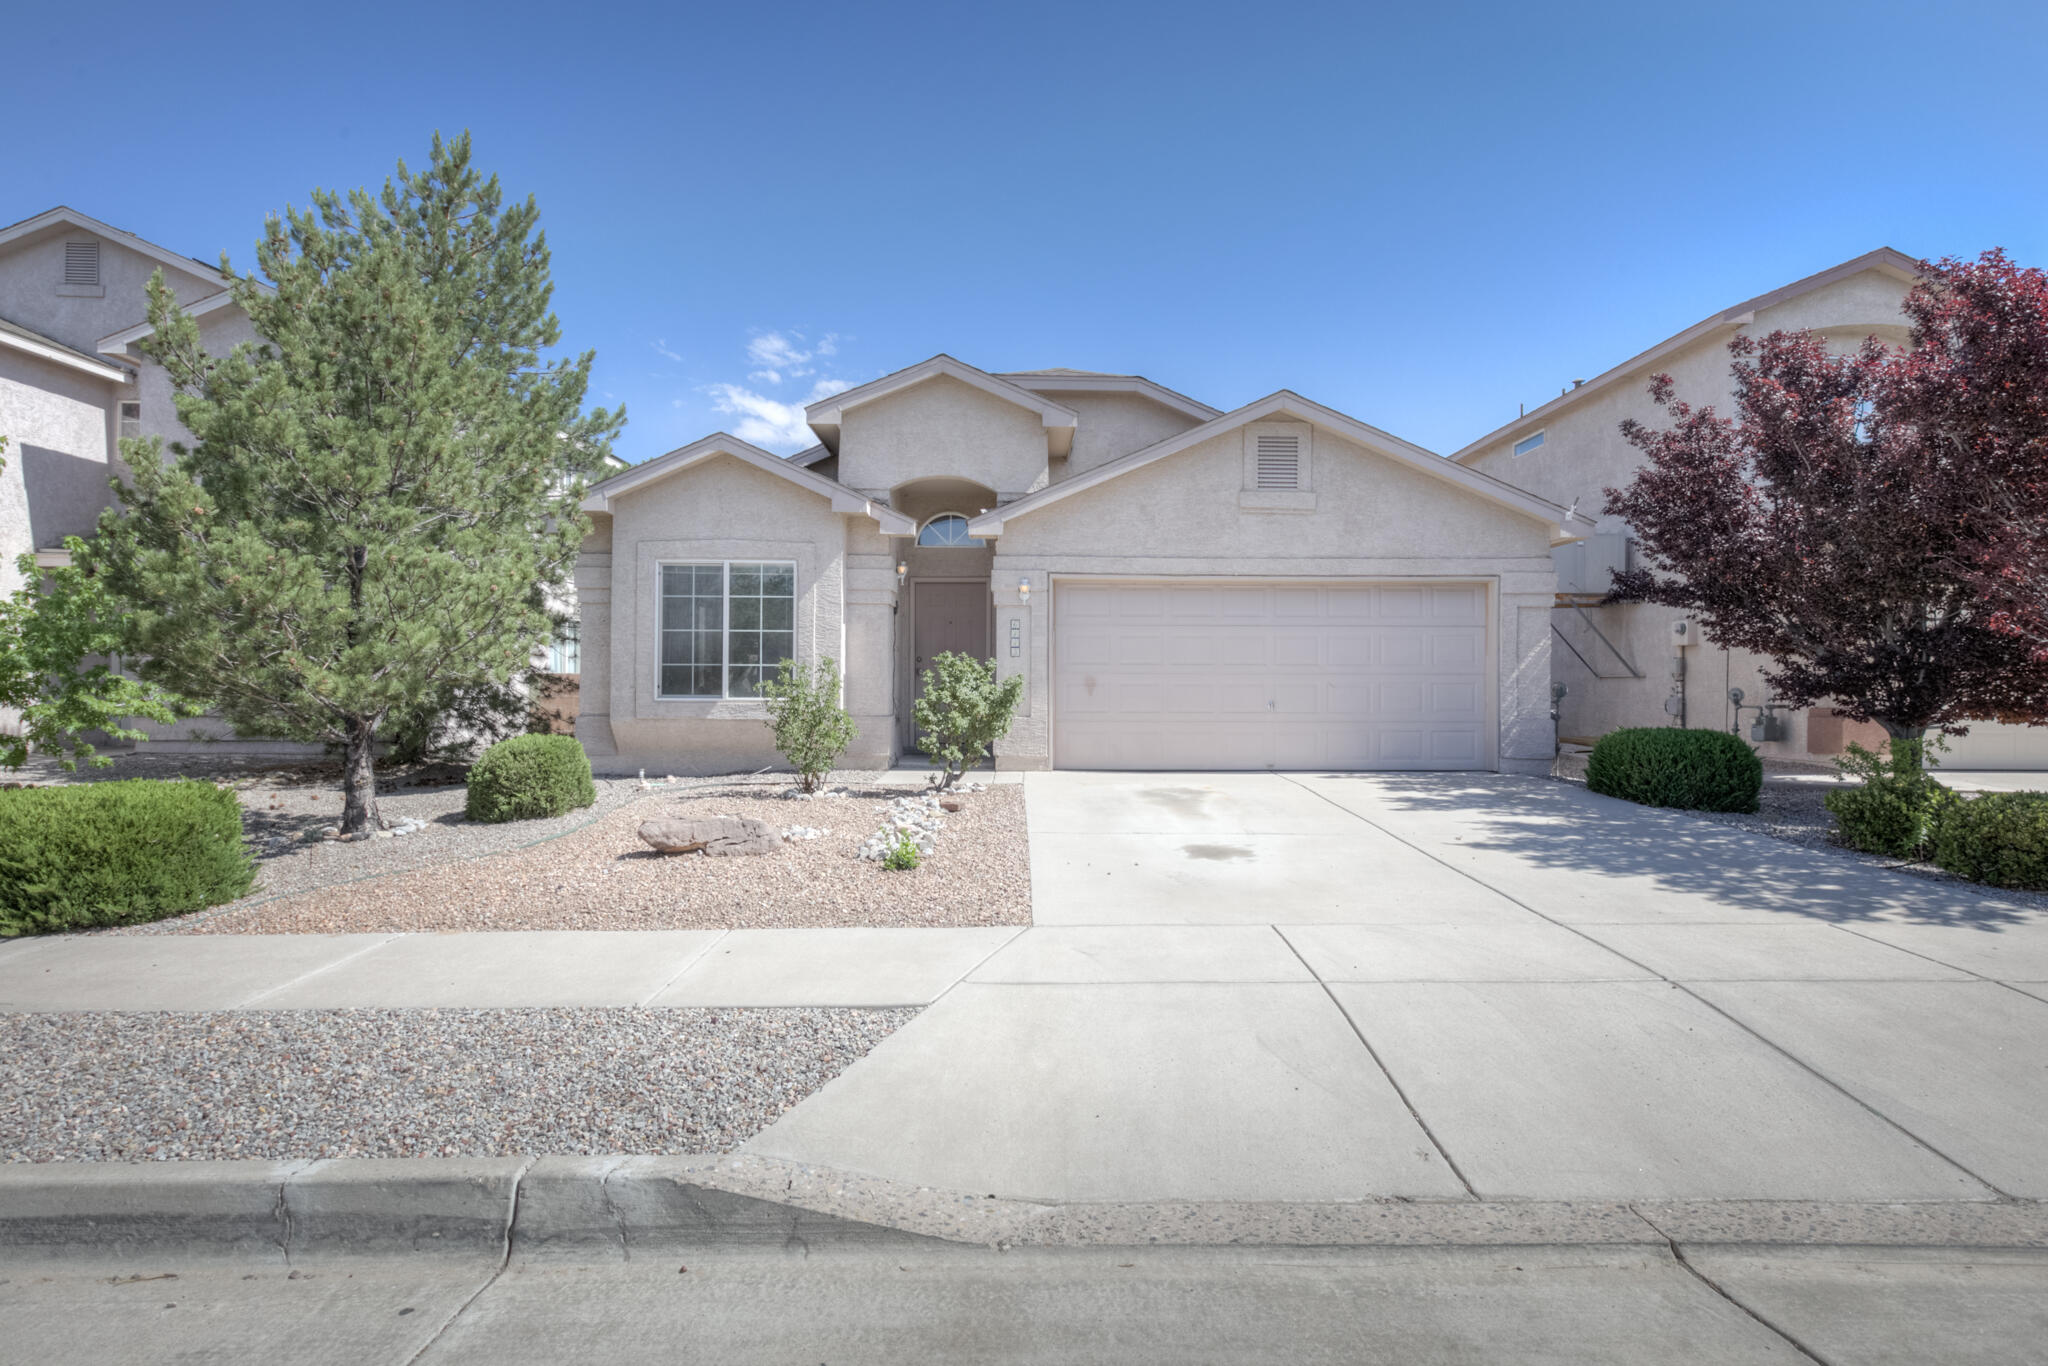 Super great deal!  This home has four bedrooms, a spacious floorplan with two living areas, great location, close to shopping, parks and trails! Newer roof. The HOA offers access to a Community Pool!  The home is priced to sell with no repairs.